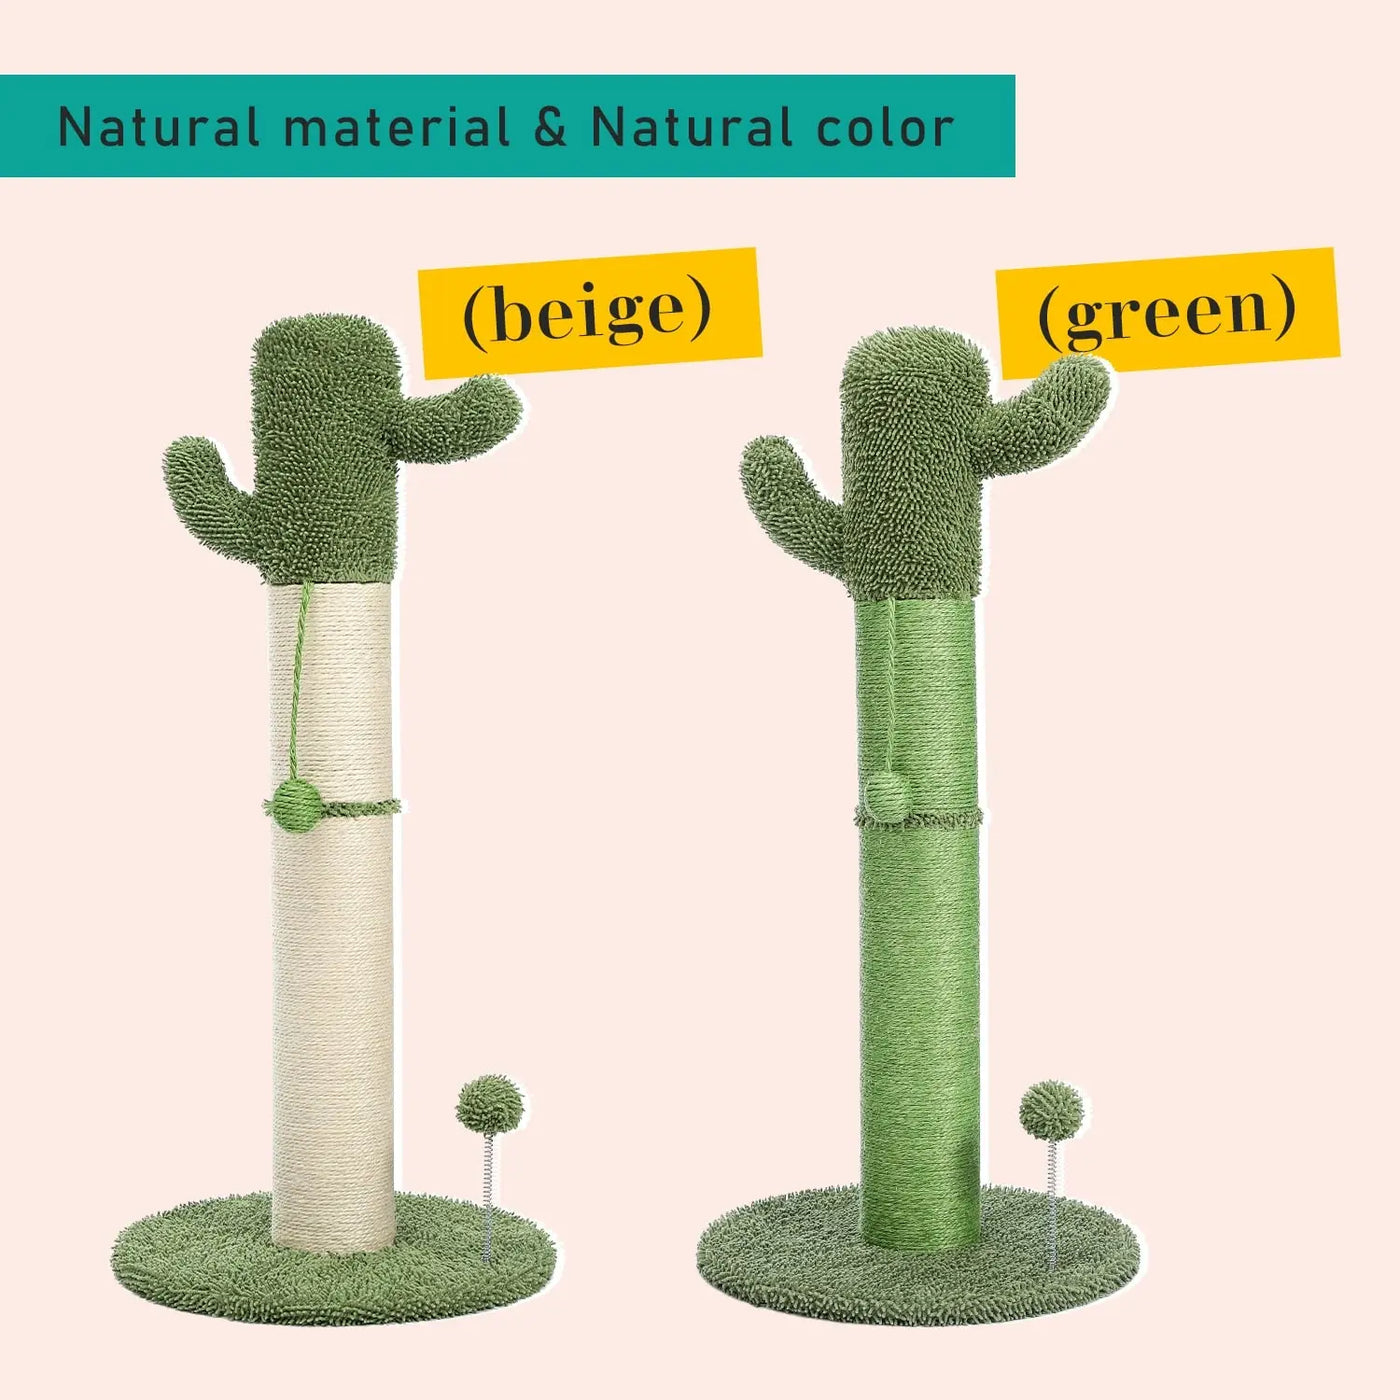 Cute Cactus Cat Tree Toy Fast Delivery happypetssupply